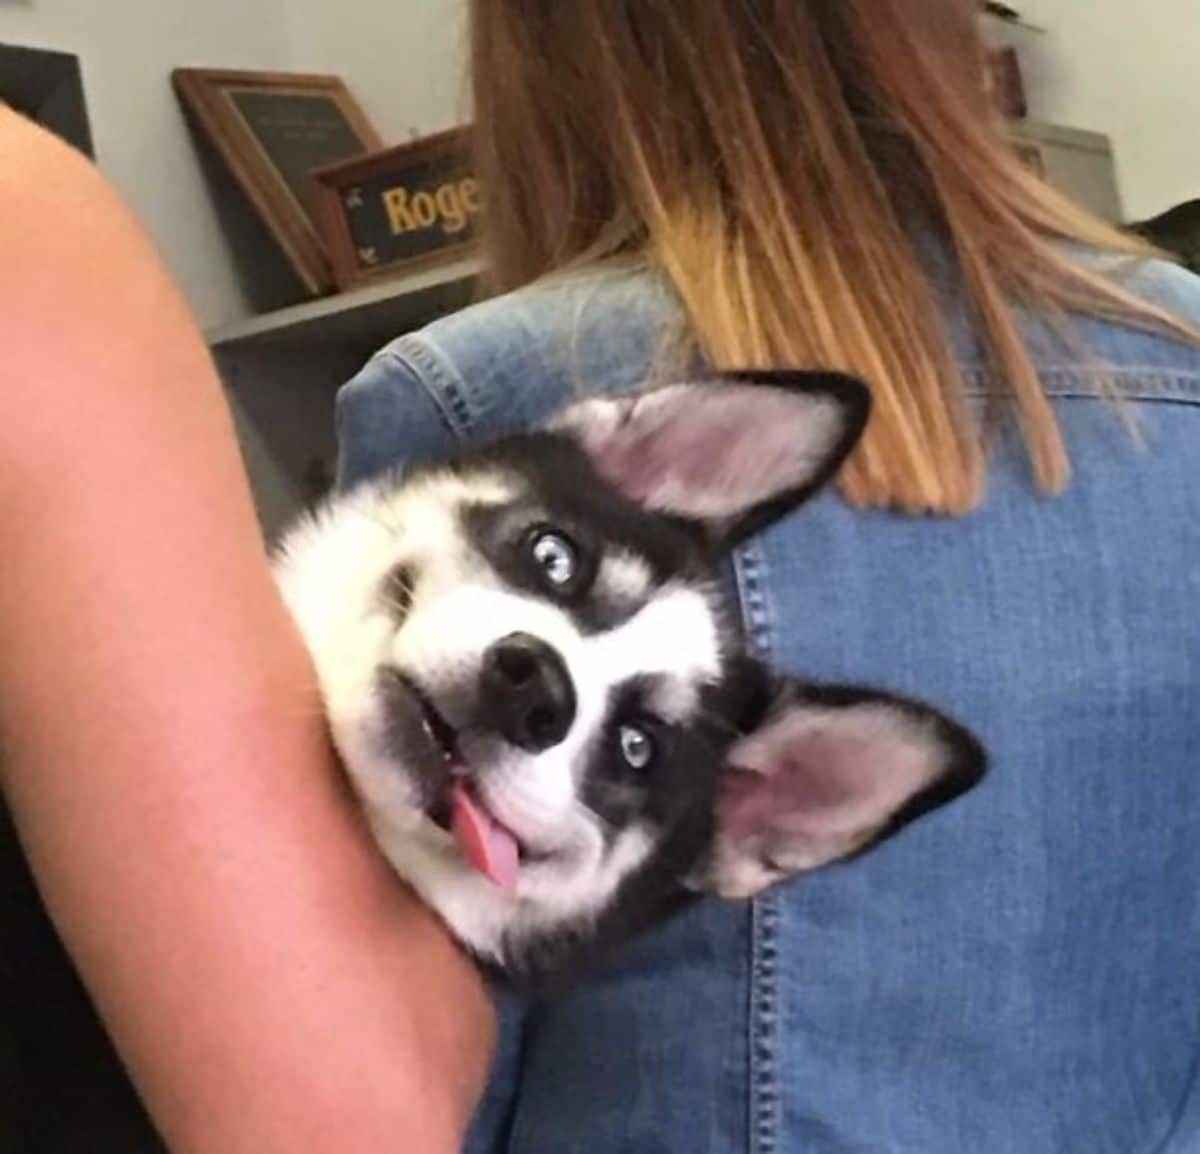 black and white husky puppy with tngue sticking out being held like a baby by someone